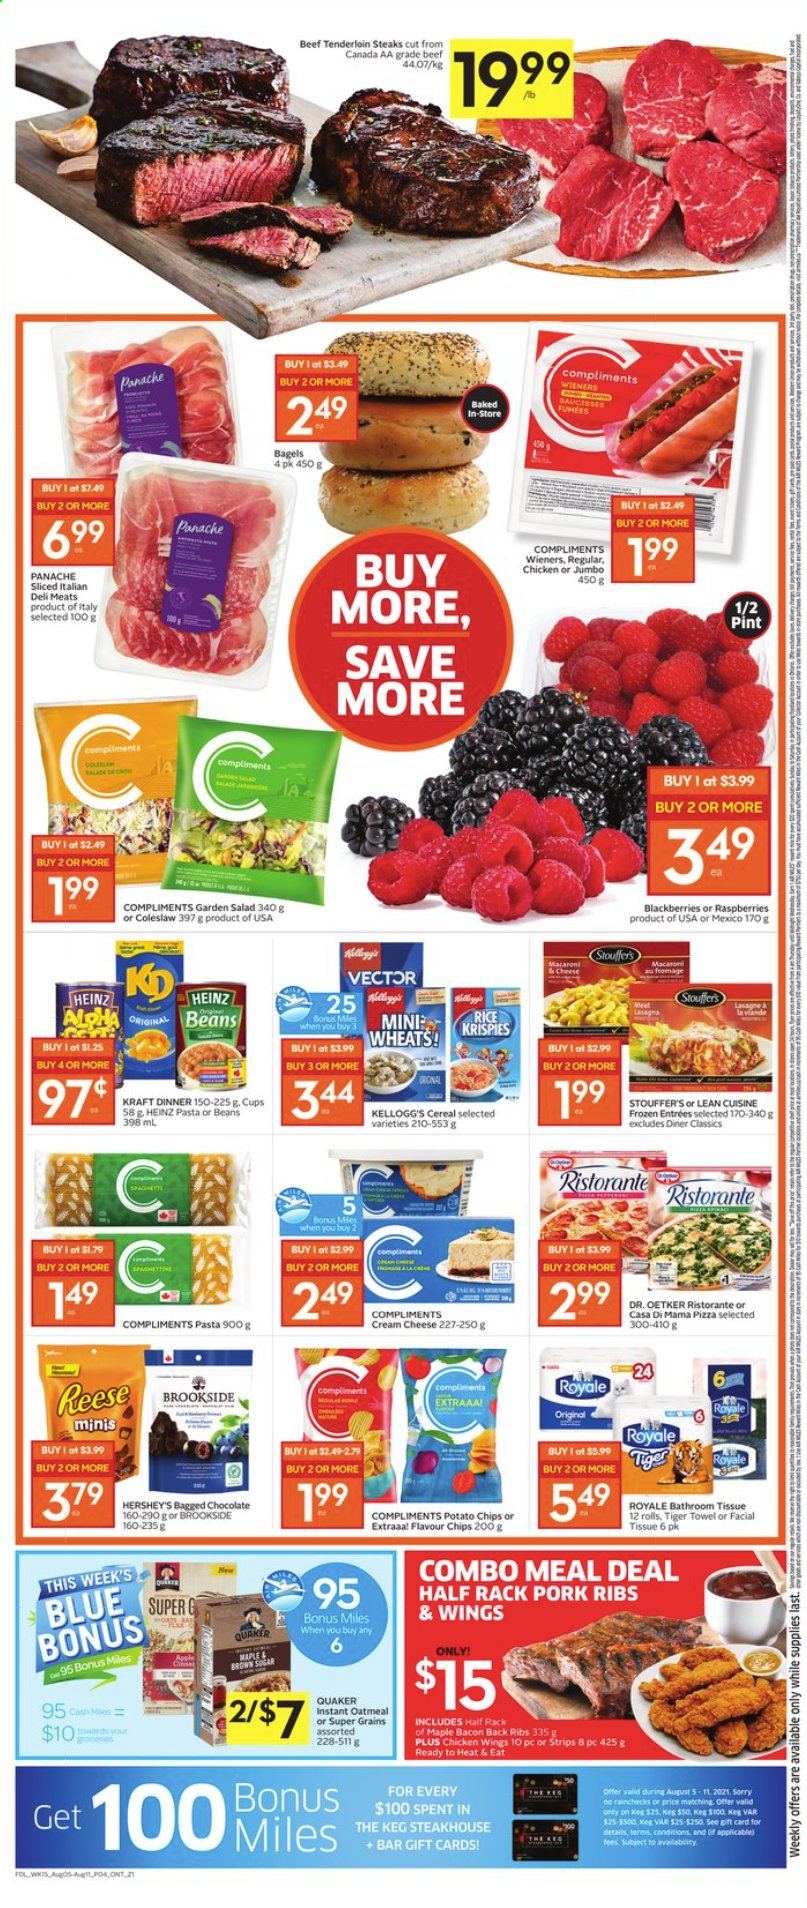 thumbnail - Foodland Flyer - August 05, 2021 - August 11, 2021 - Sales products - beans, salad, blackberries, coleslaw, pizza, macaroni, Quaker, lasagna meal, Lean Cuisine, Kraft®, bacon, Dr. Oetker, Hershey's, chicken wings, strips, Stouffer's, chocolate, Kellogg's, potato chips, oatmeal, Heinz, cereals, Rice Krispies, beef meat, beef tenderloin, pork meat, pork ribs, steak. Page 4.